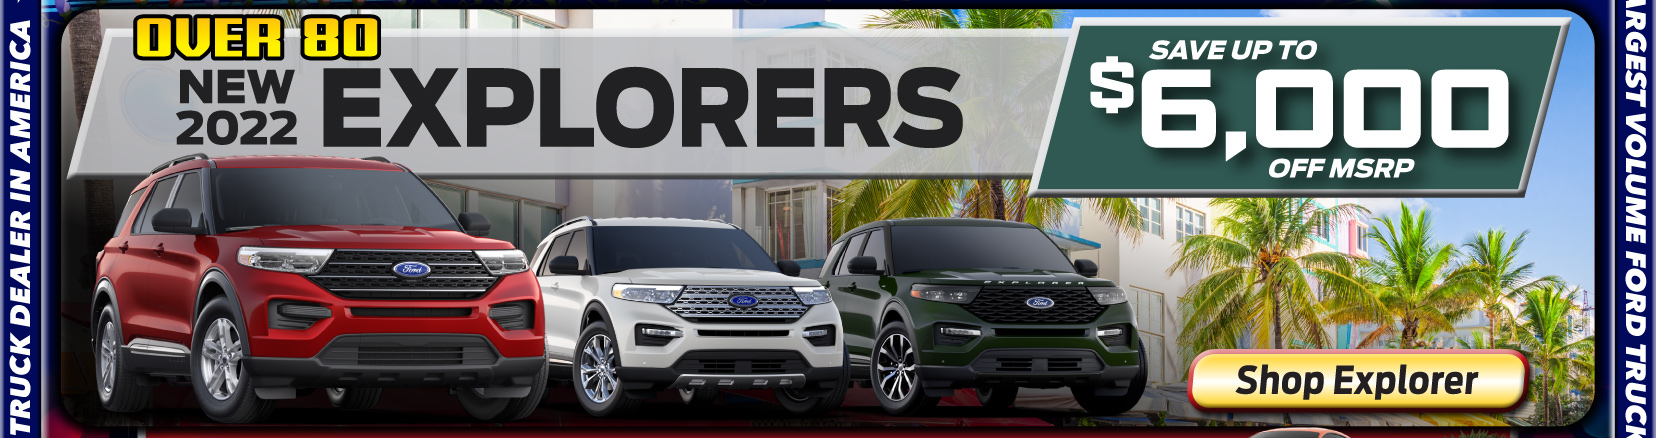 Up To $6,000 off Explorers